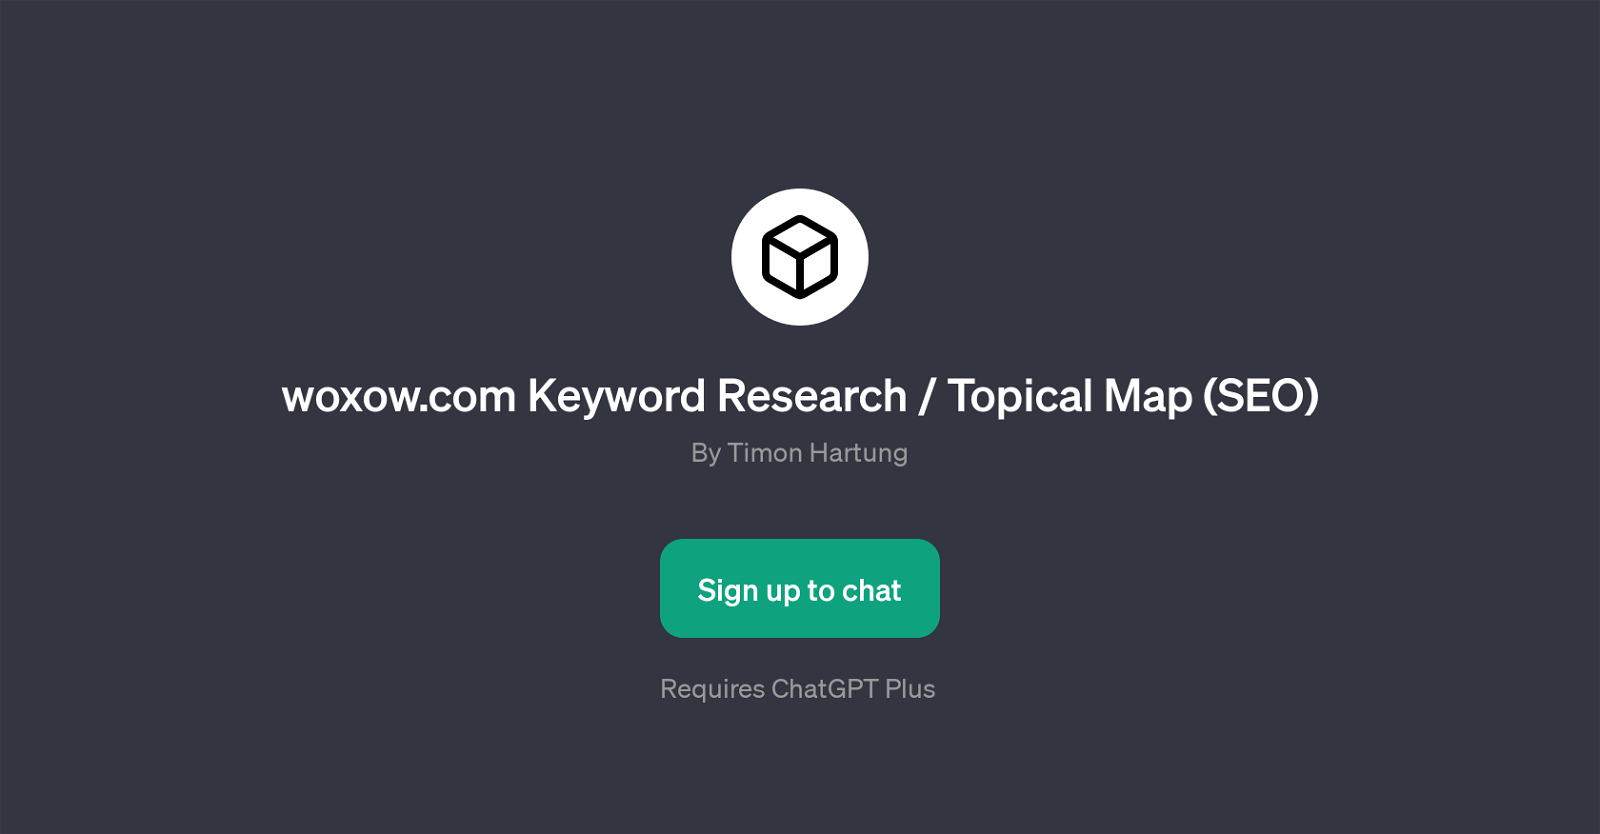 woxow.com Keyword Research / Topical Map (SEO) website